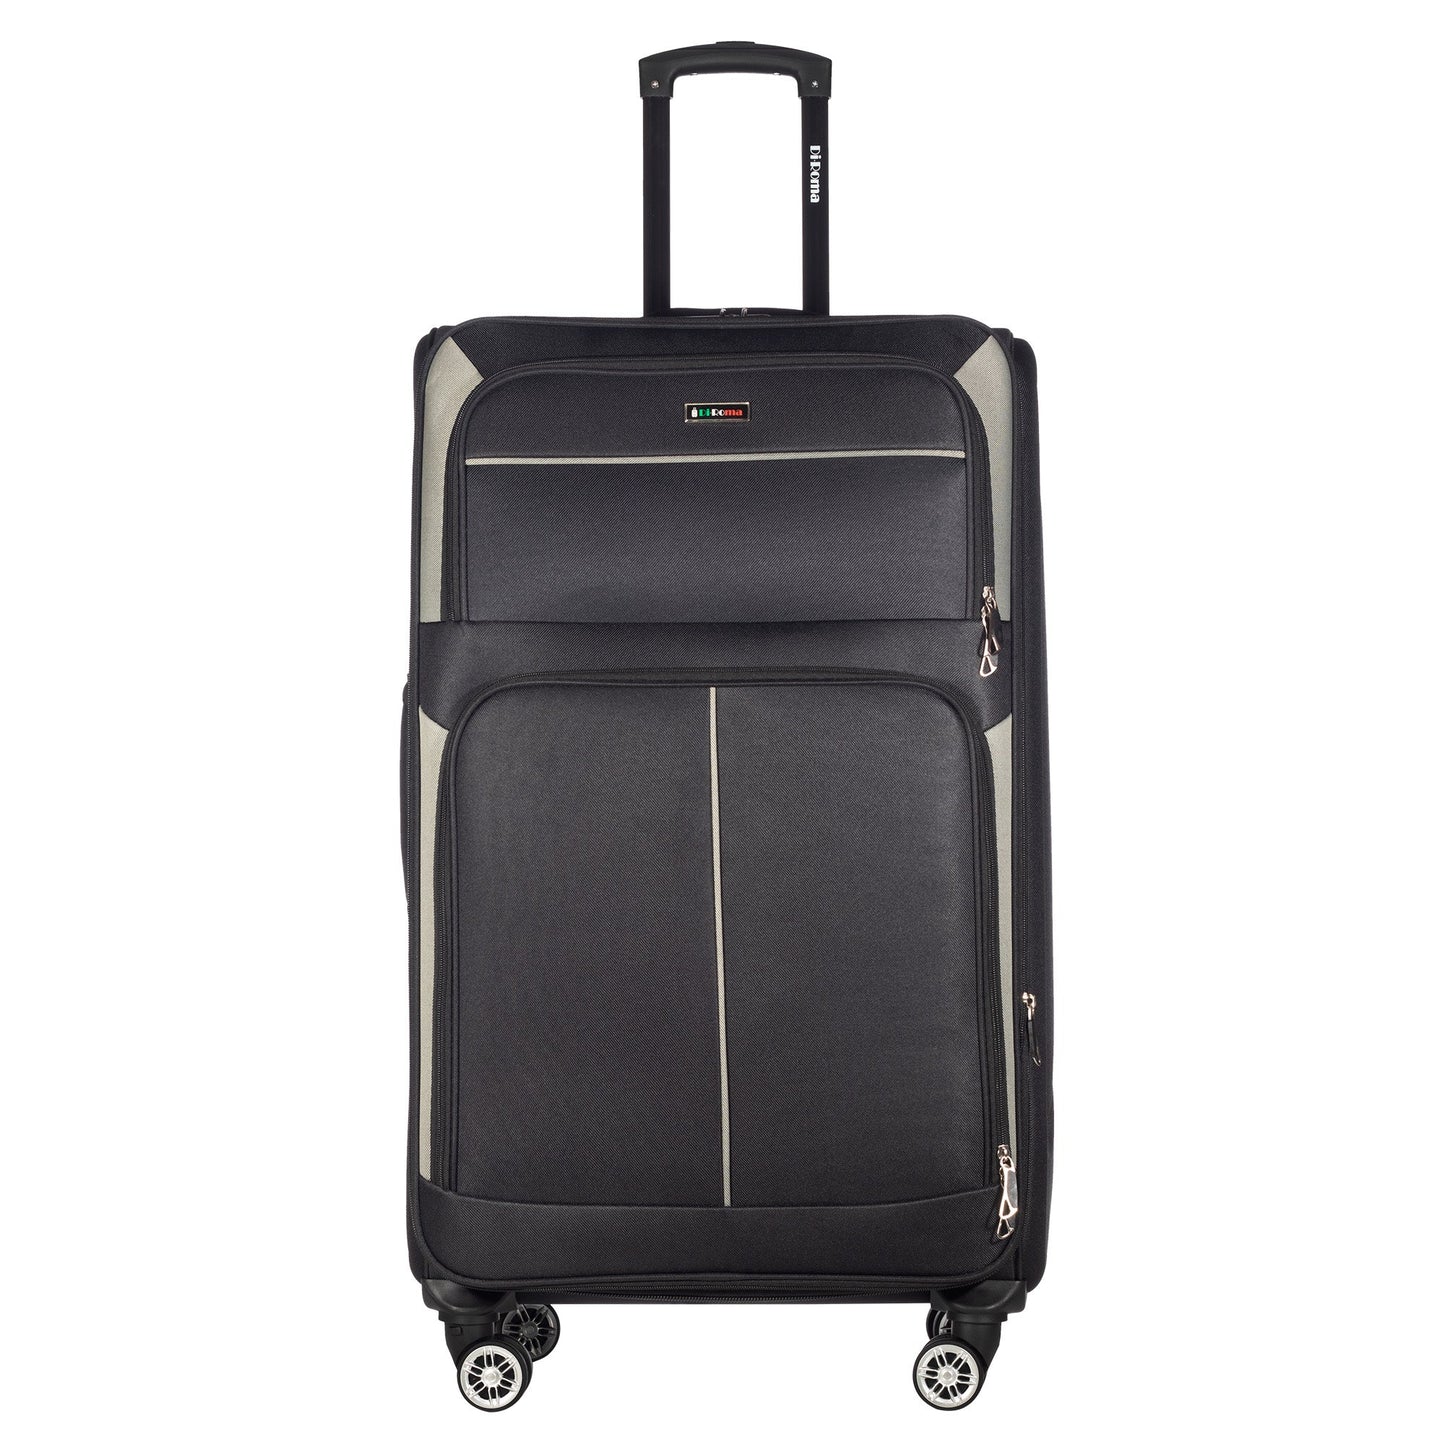 Star collection black luggage Set(20/26/28/30")